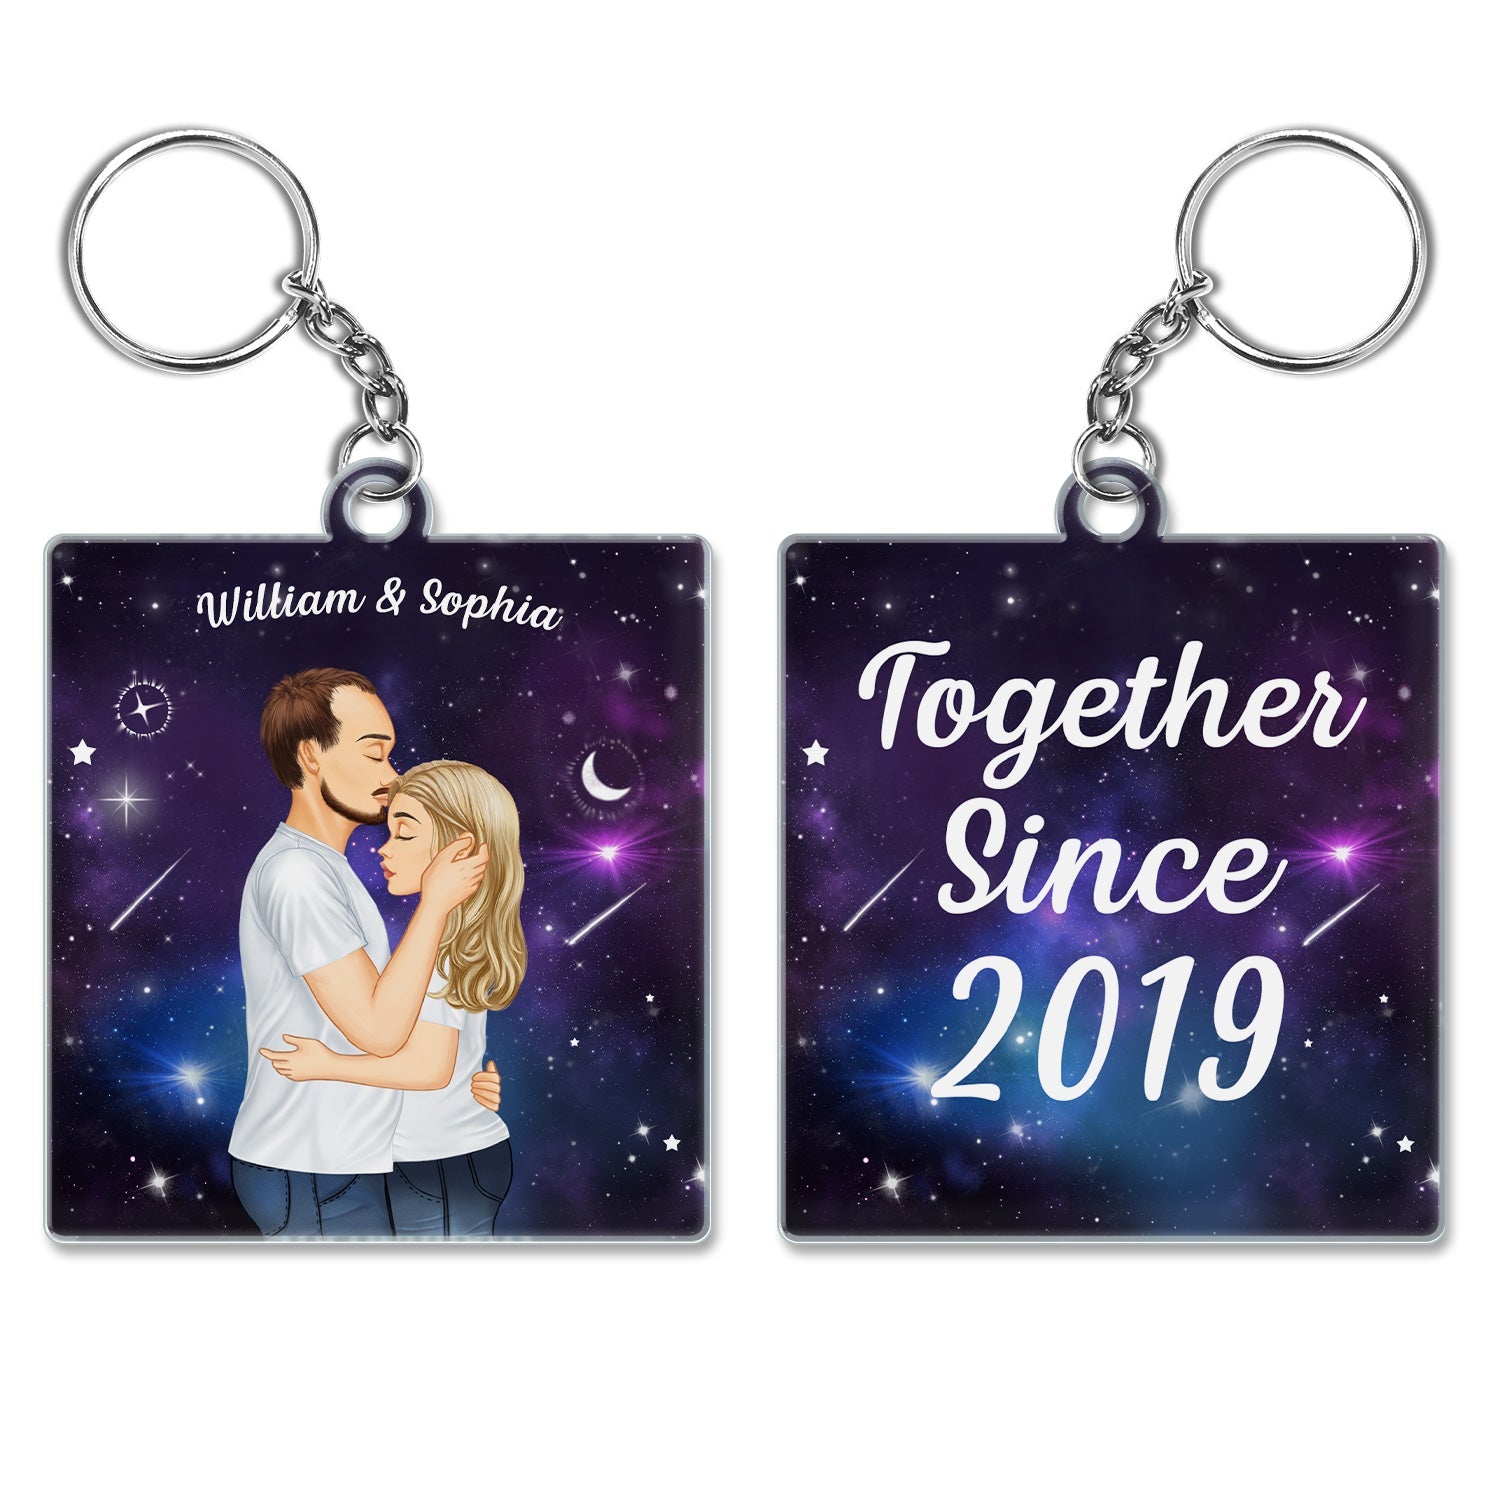 In The Galaxy Night Sky Kissing Couple Sideview - Birthday, Loving, Anniversary Gift For Spouse, Husband, Wife, Married Couple, Boyfriend, Girlfriend - Personalized Acrylic Keychain